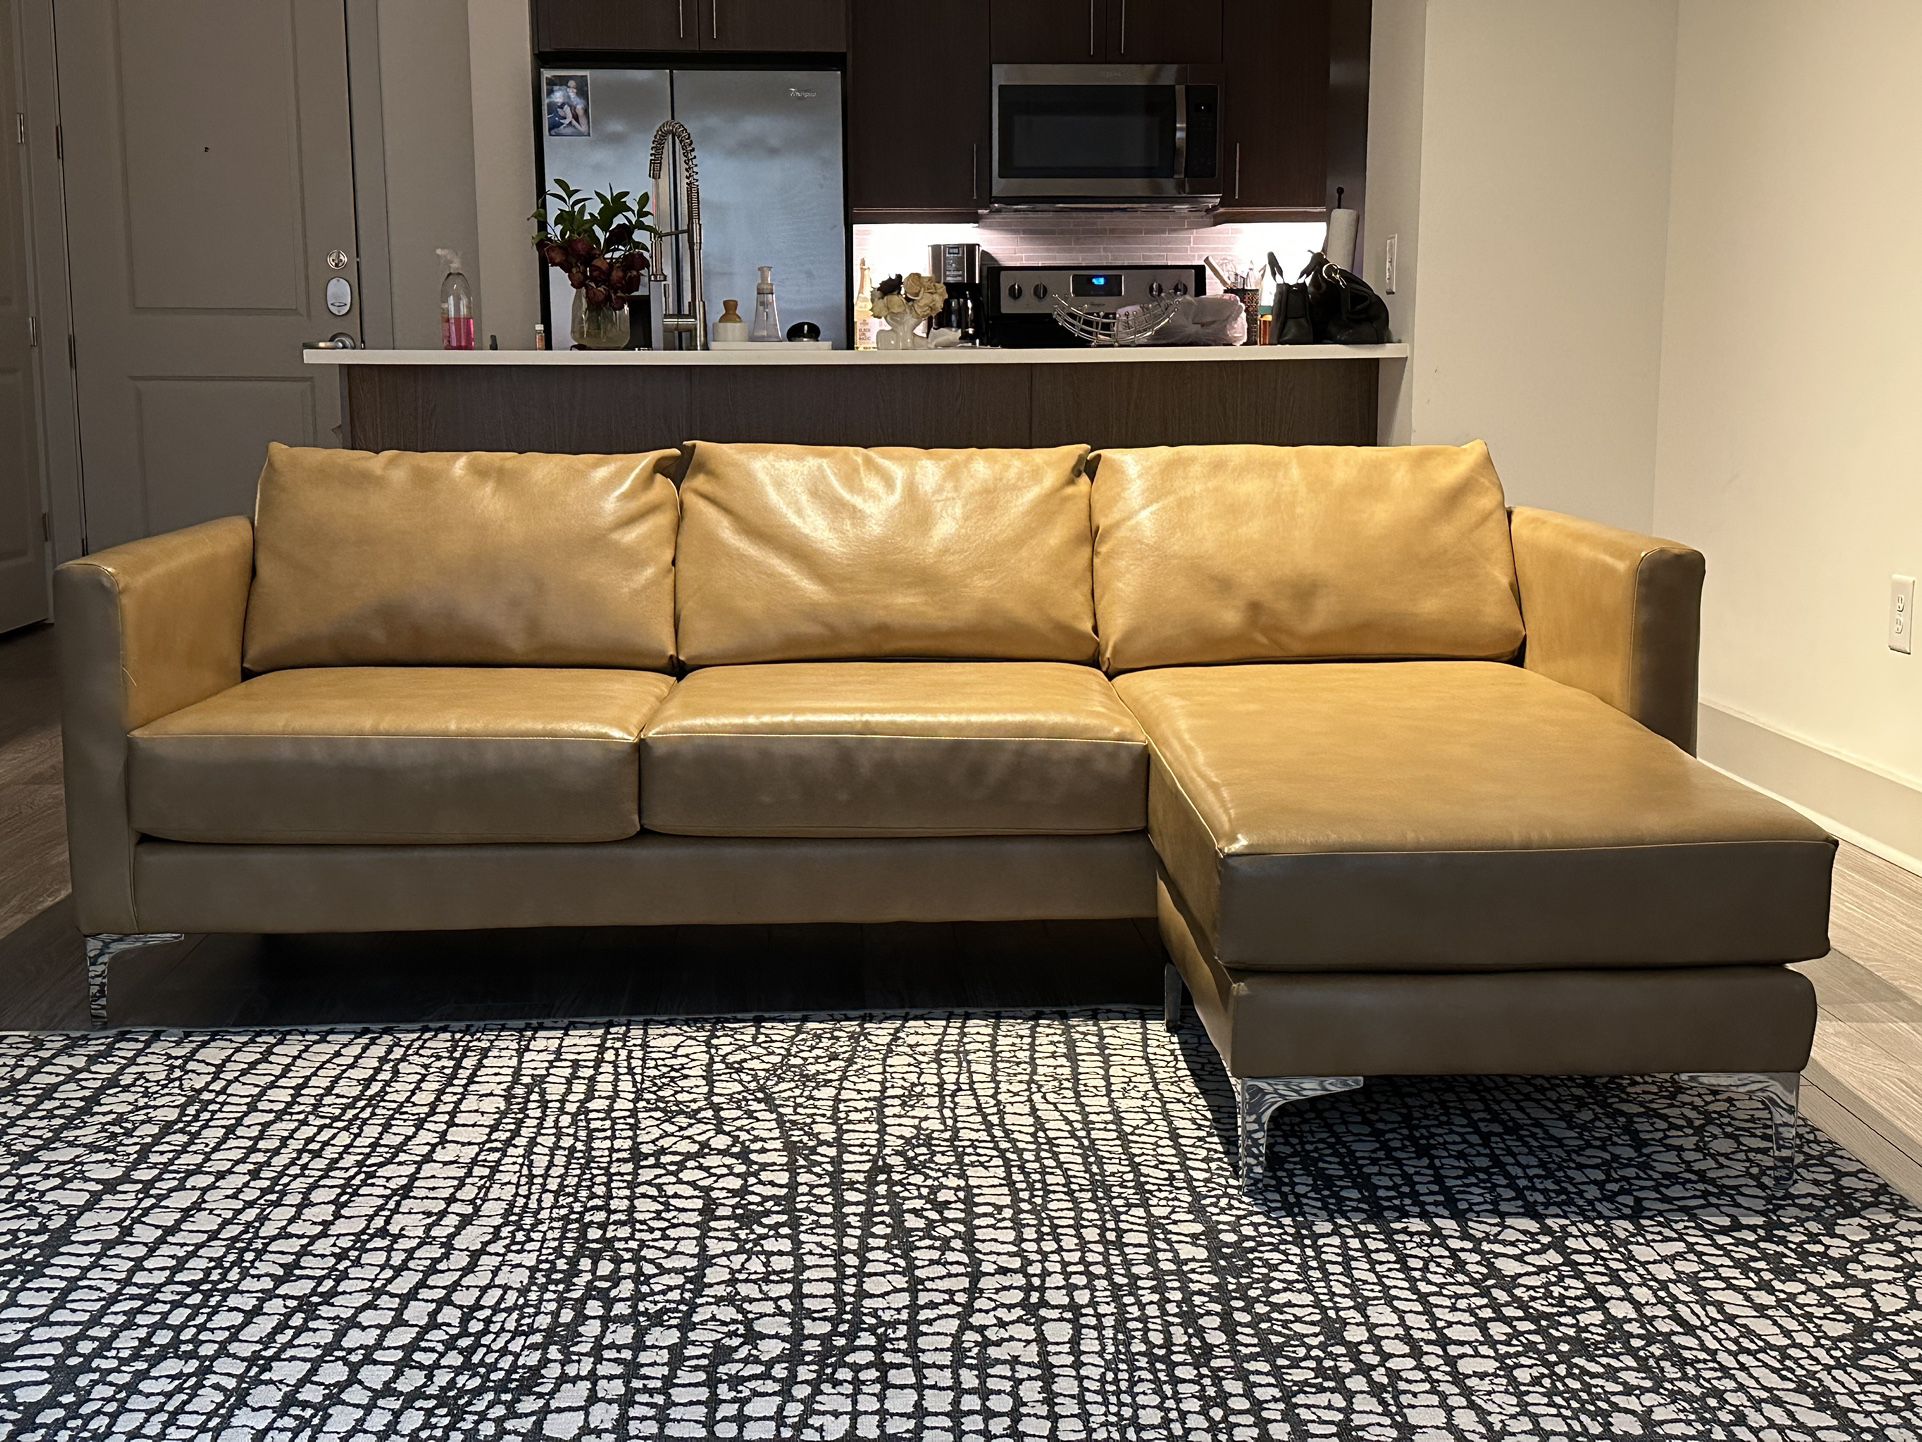 Perfect Sectional For A Small Apartment!